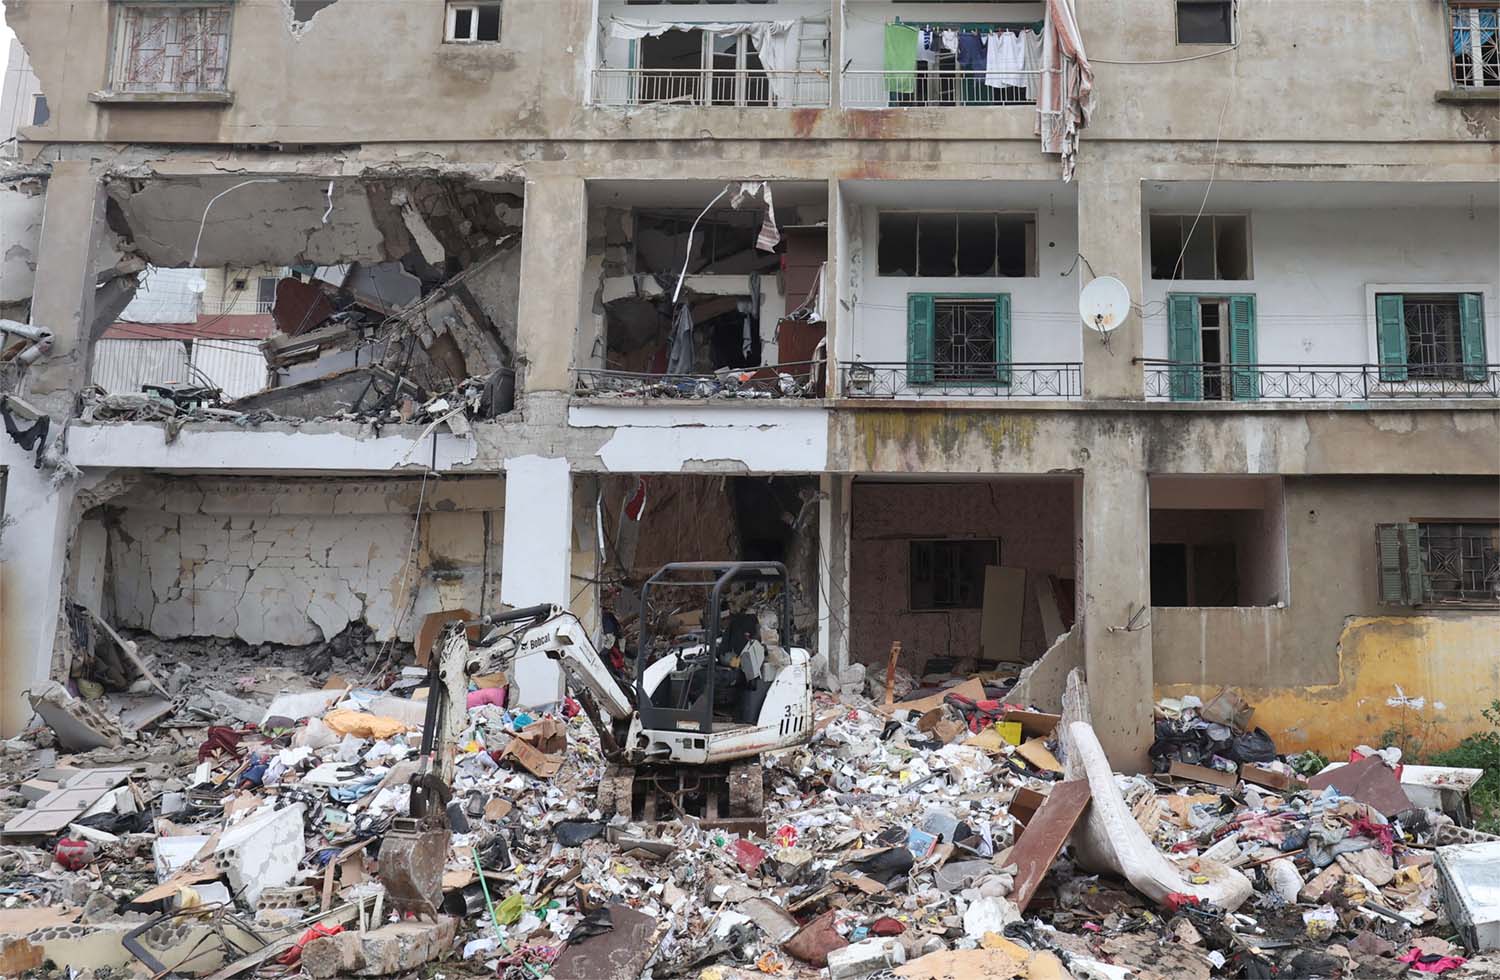 The cross-border shelling has already killed more than 200 people in Lebanon